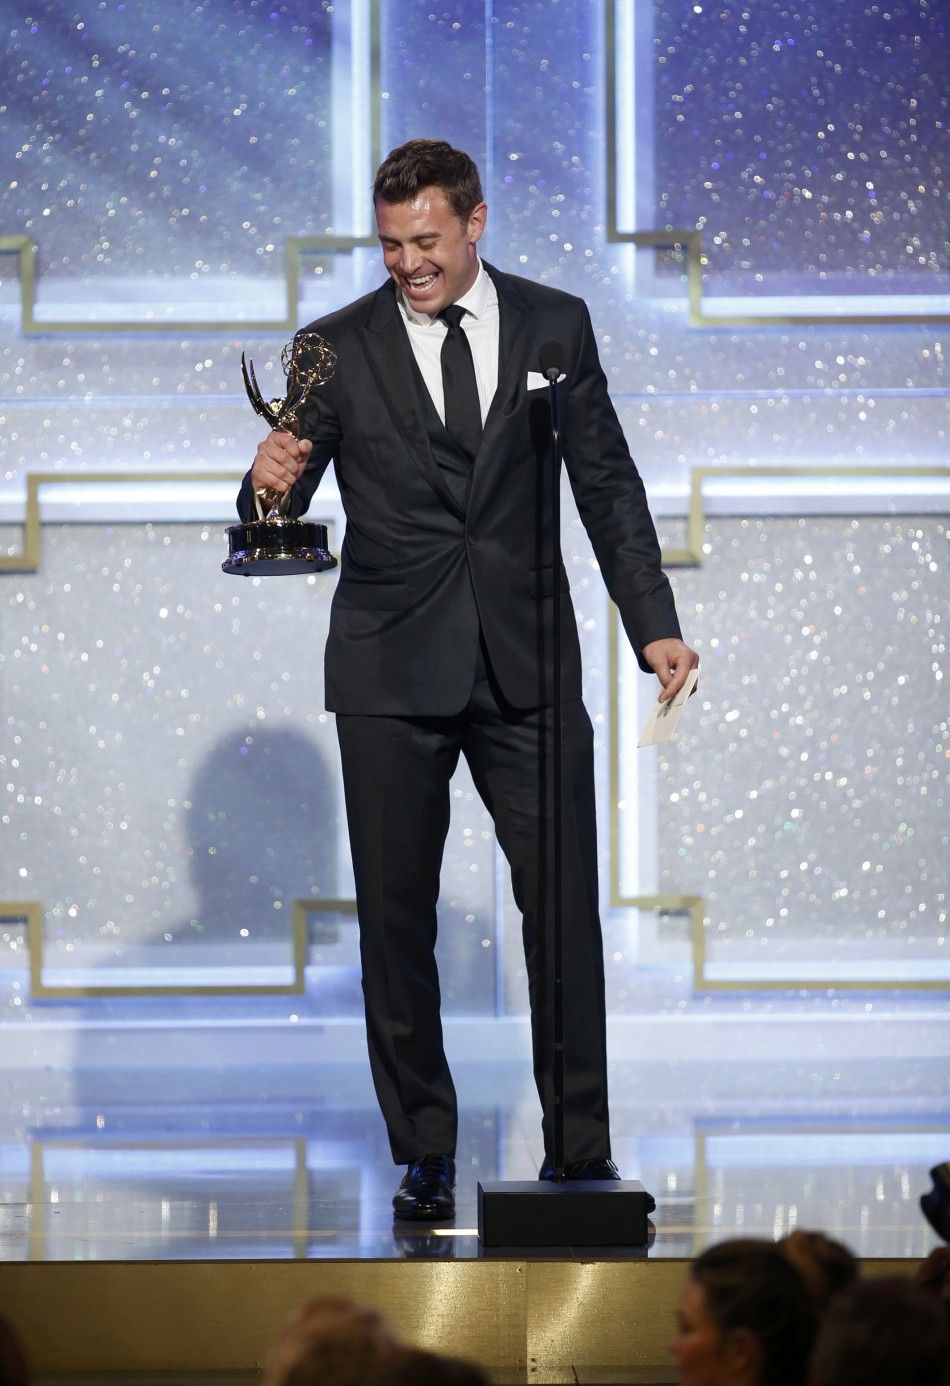 Billy Miller Accepts the Award for Outstanding Lead Actor in a Drama Series for His Role on The Young and the Restless During the 41st Annual Daytime Emmy Awards in Beverly Hills